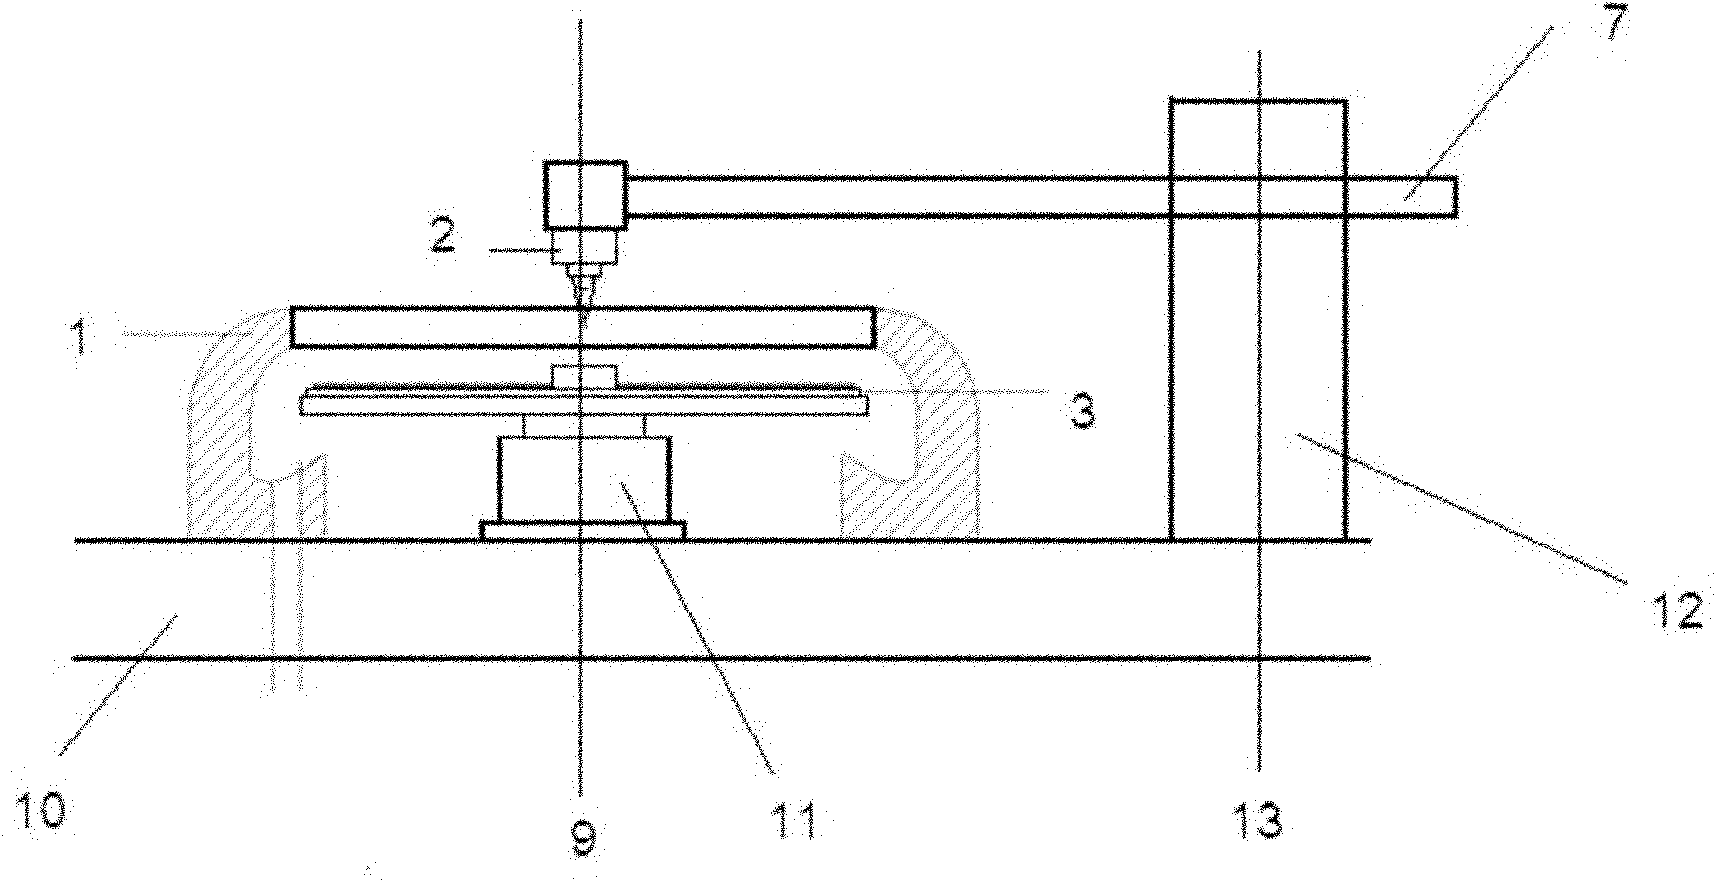 Dye spin-coating apparatus for DVDR optical discs